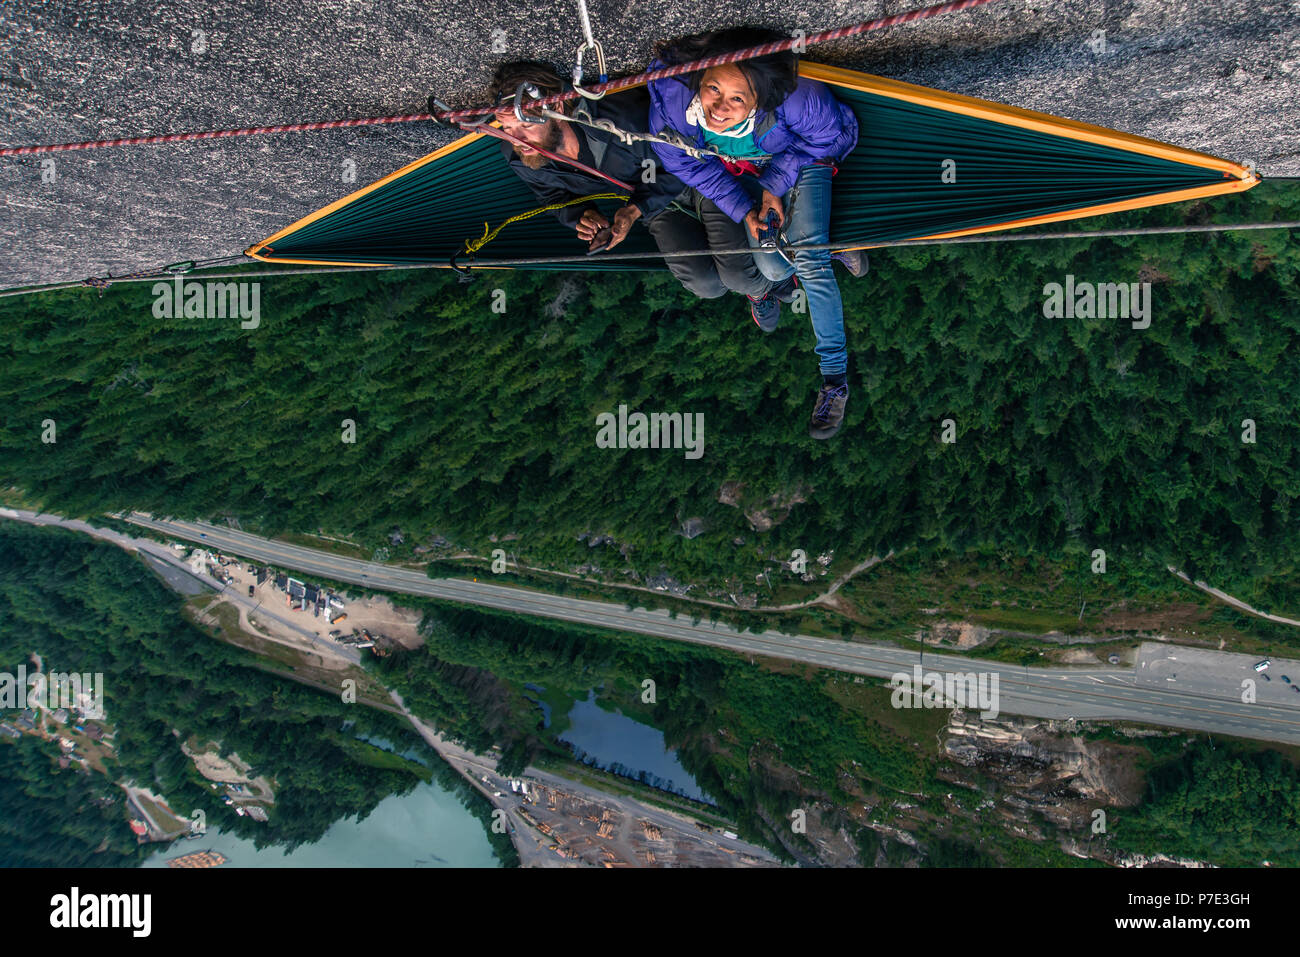 Man and woman sitting on hammock on bellygood ledge, The Chief, Squamish, Canada, overhead portrait Stock Photo